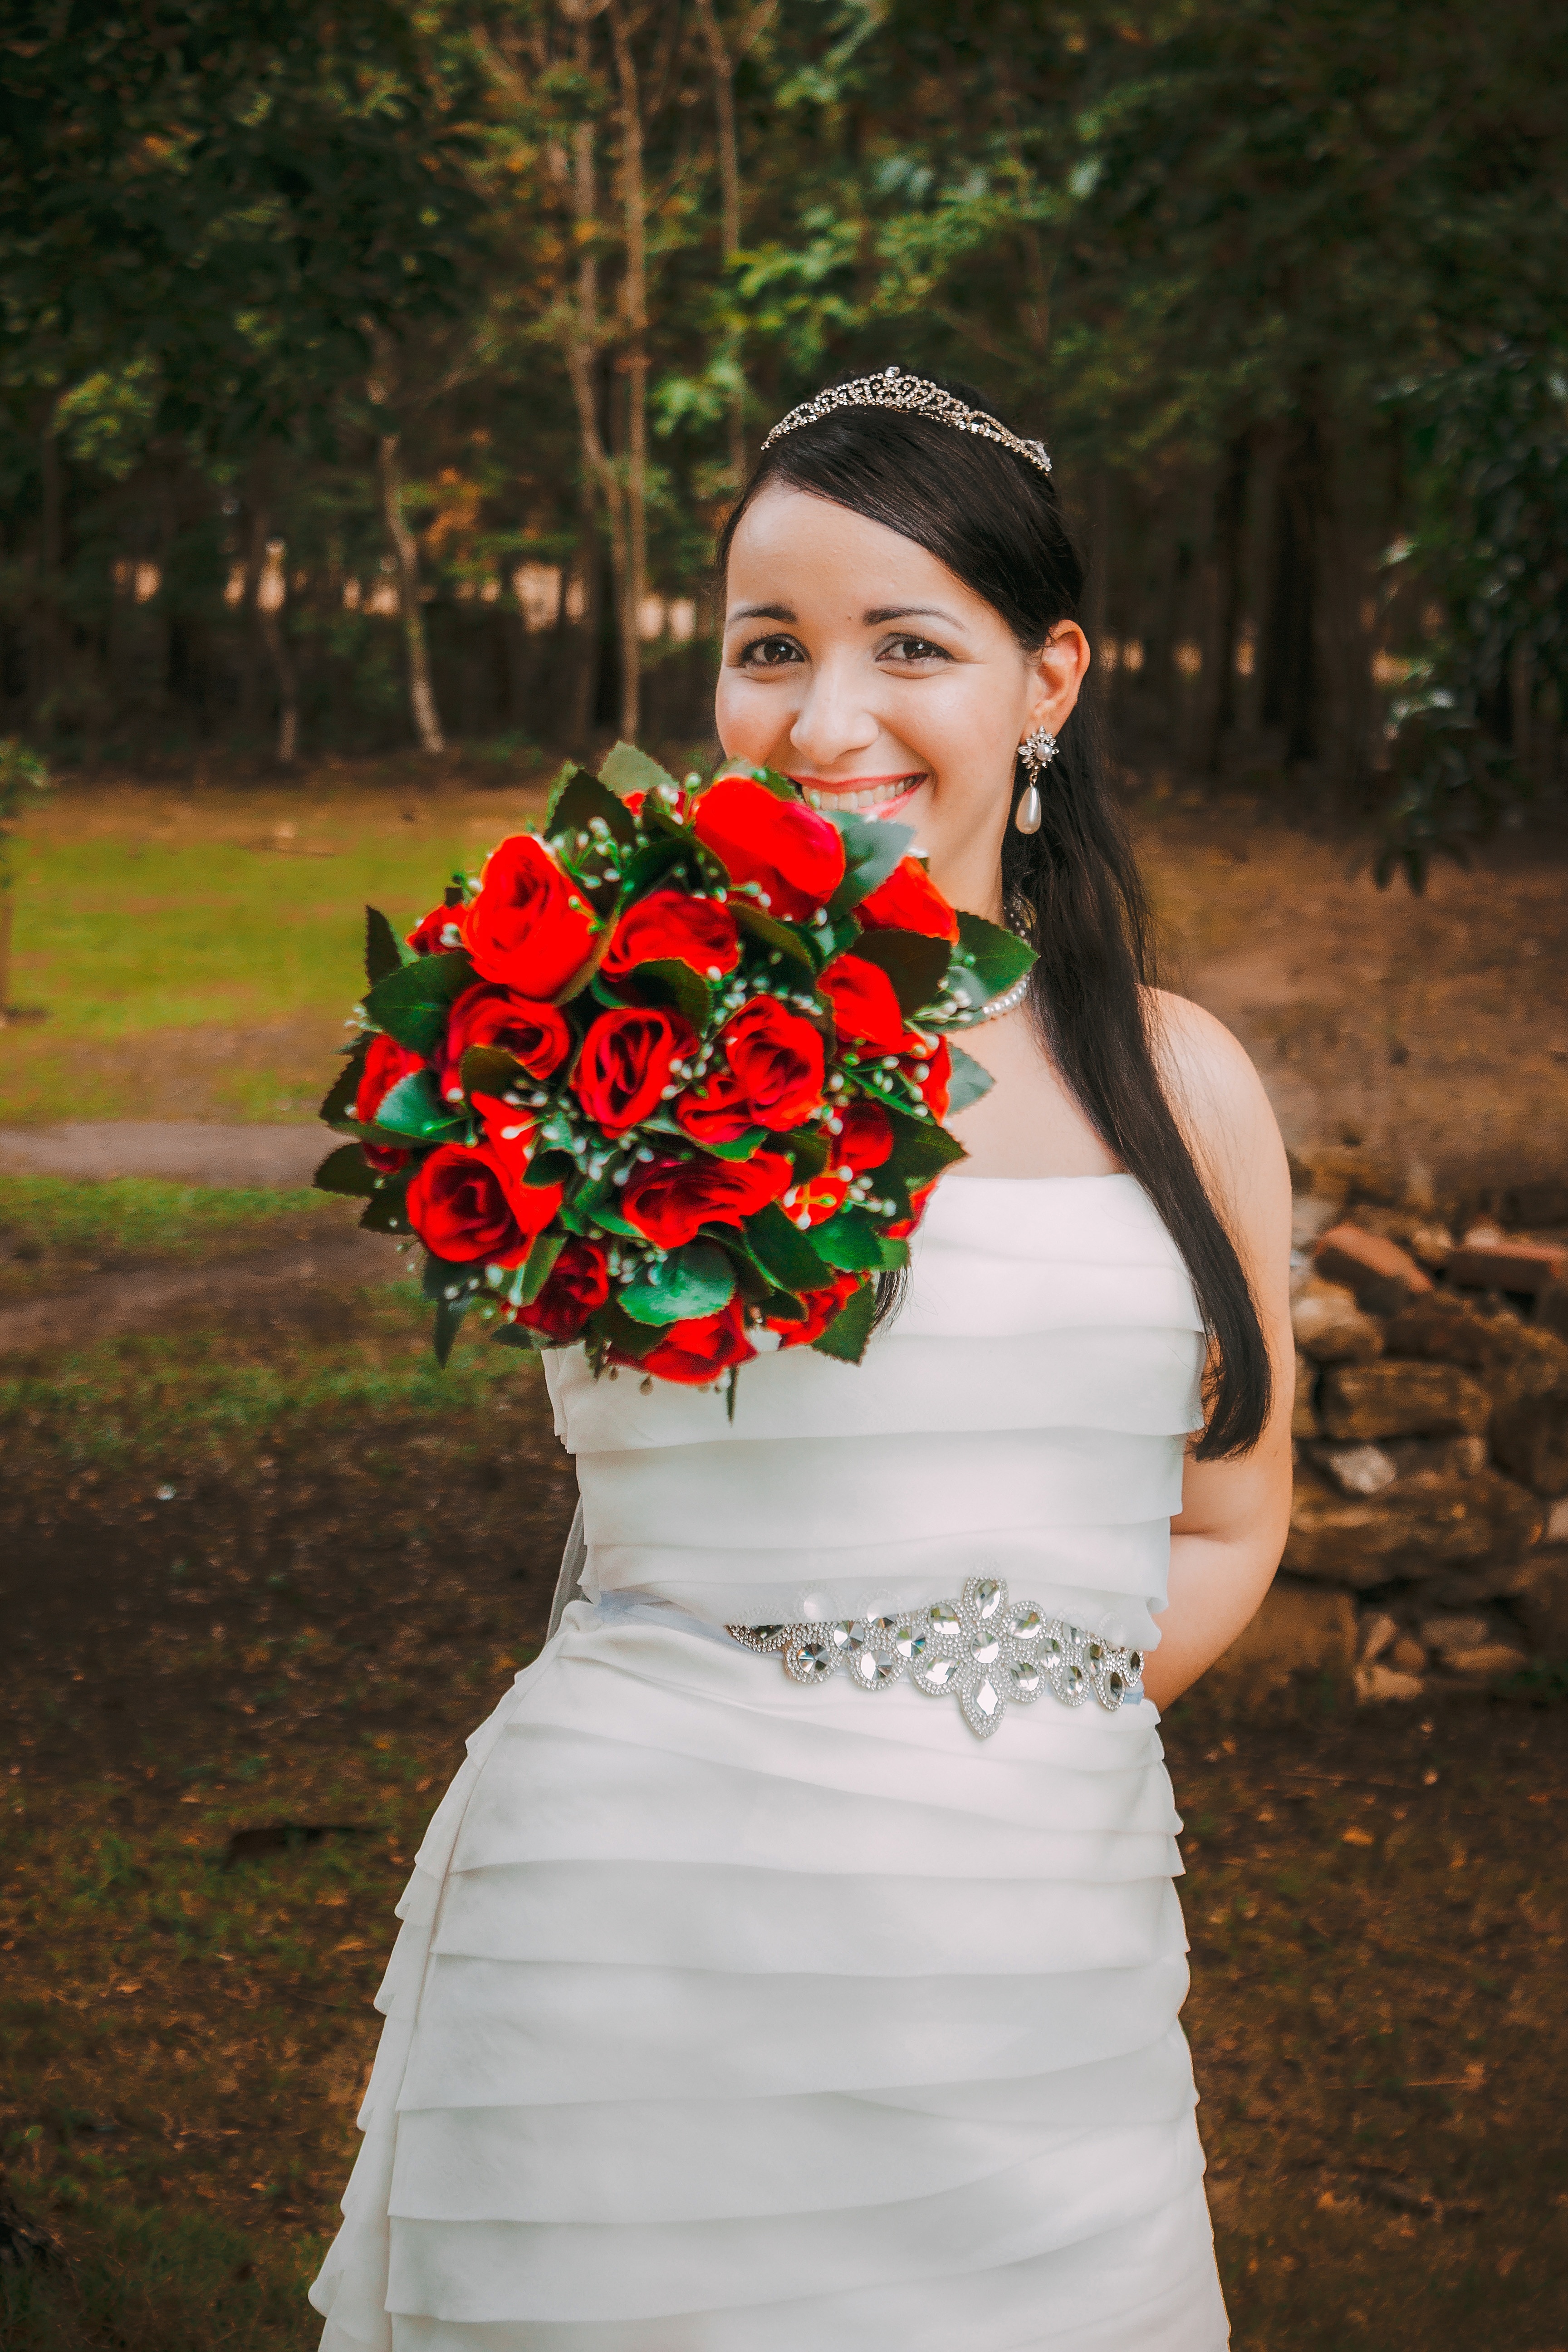 woman wearing wedding gown holding red rose bouquet